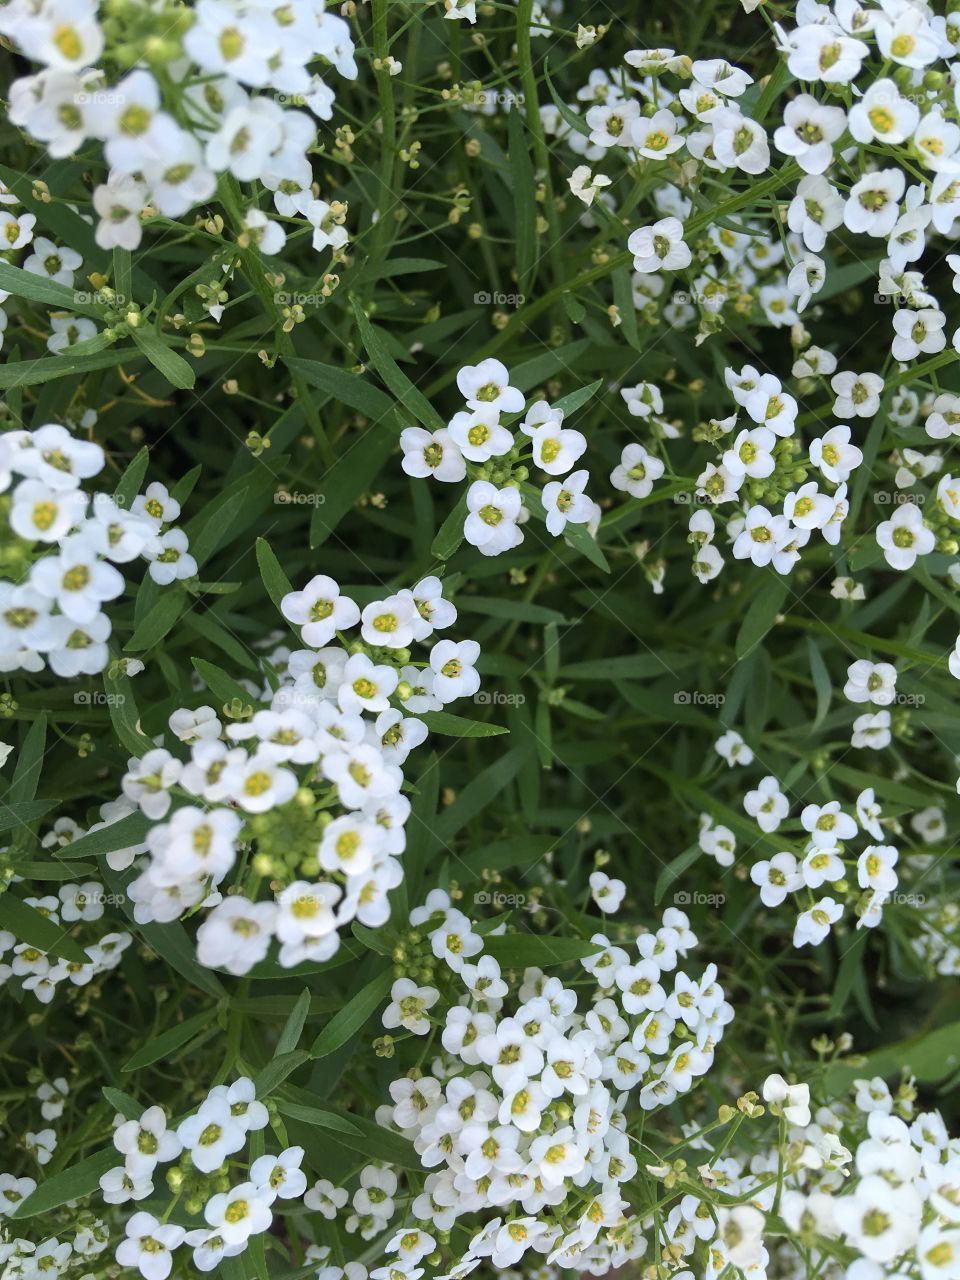 In my front yard flower garden looks like it snowed with puffs of white. Like my flowers 